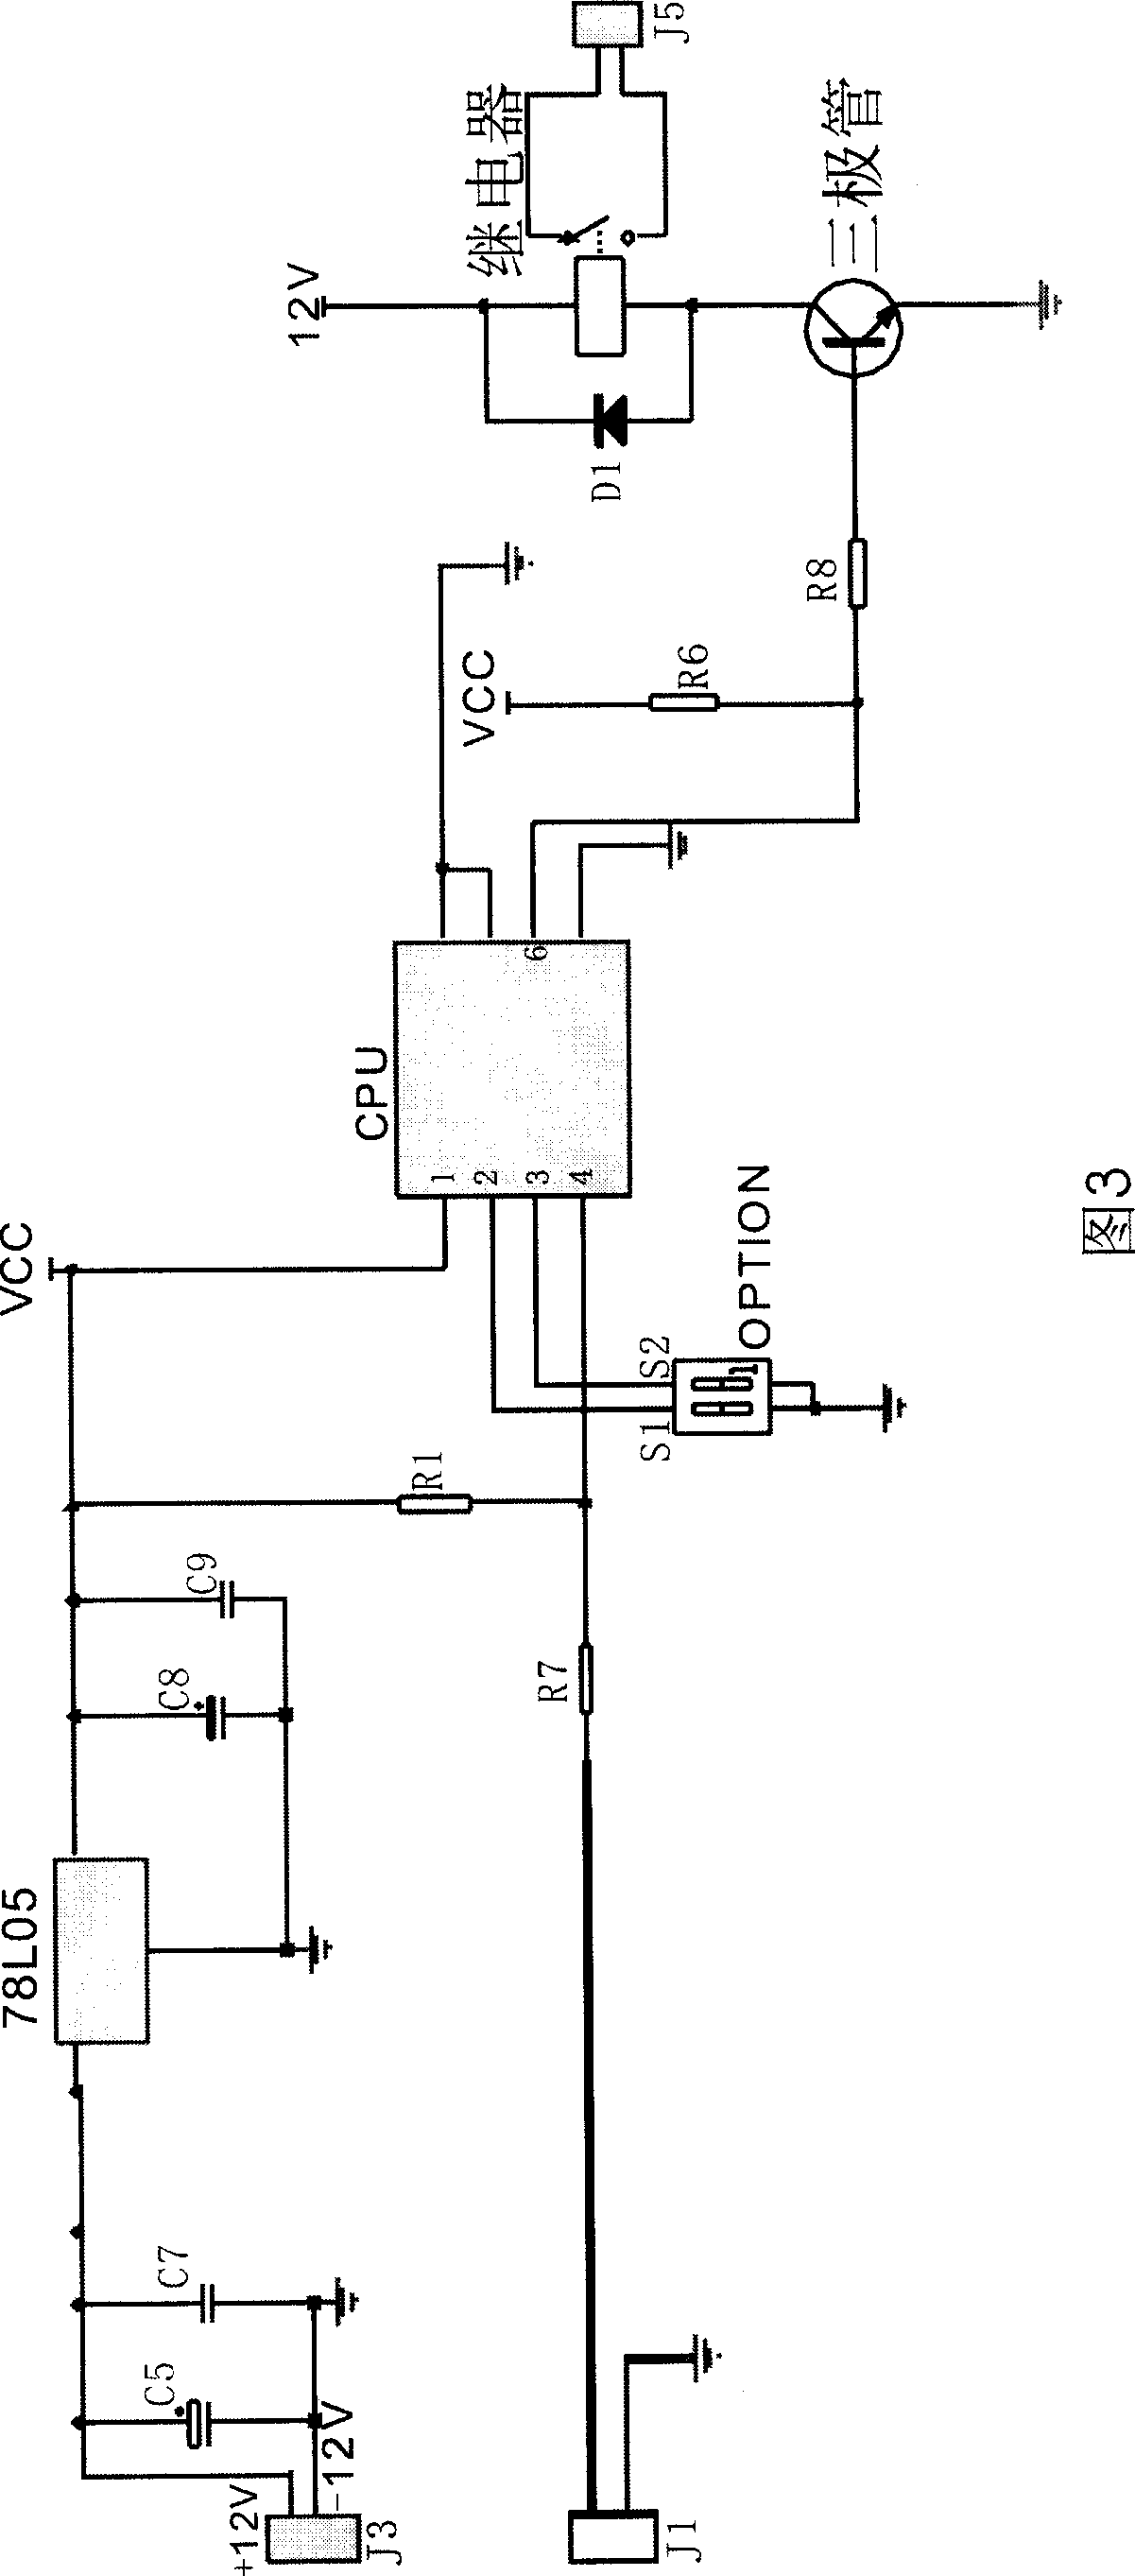 Integrated circuit for controlling time-delay by time-delay module